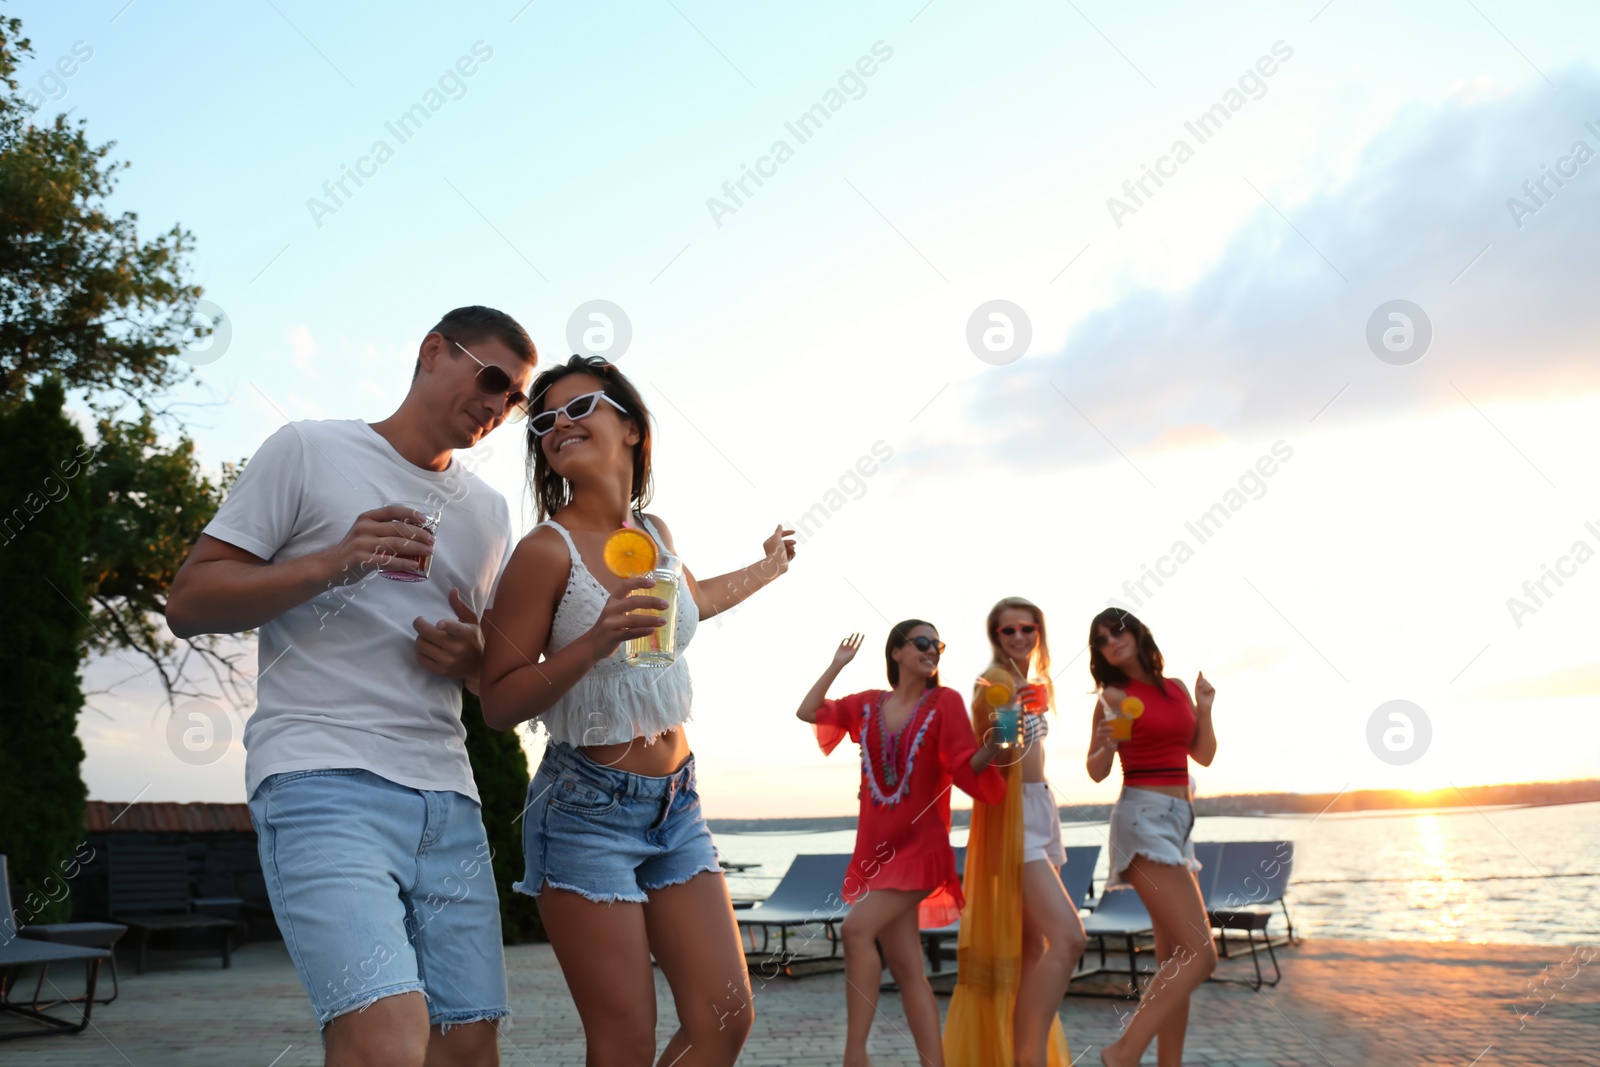 Photo of Group of happy people enjoying fun party outdoors